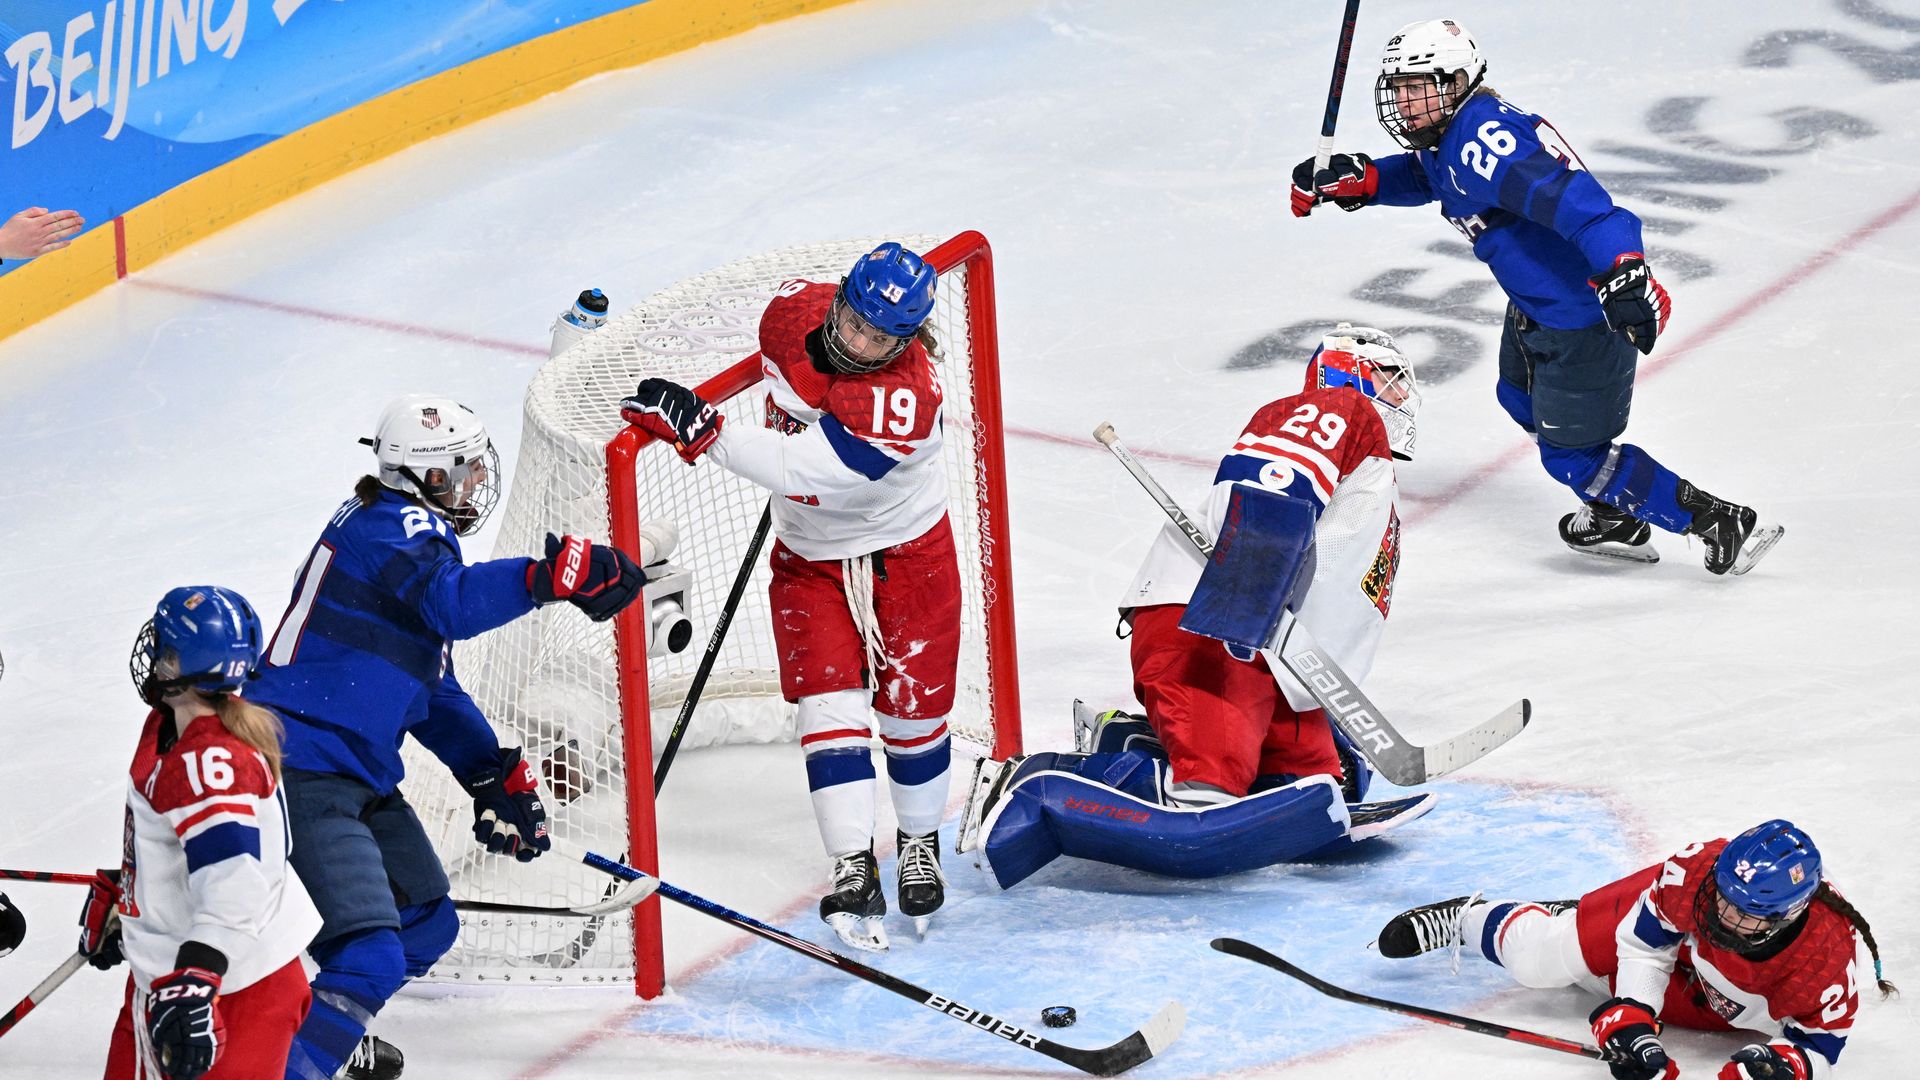  USA's Hilary Knight (2L) celebrates after scoring a goal during the women's play-offs quarterfinals match of the Winter Olympic Games ice hockey competition between USA and Czech Republic